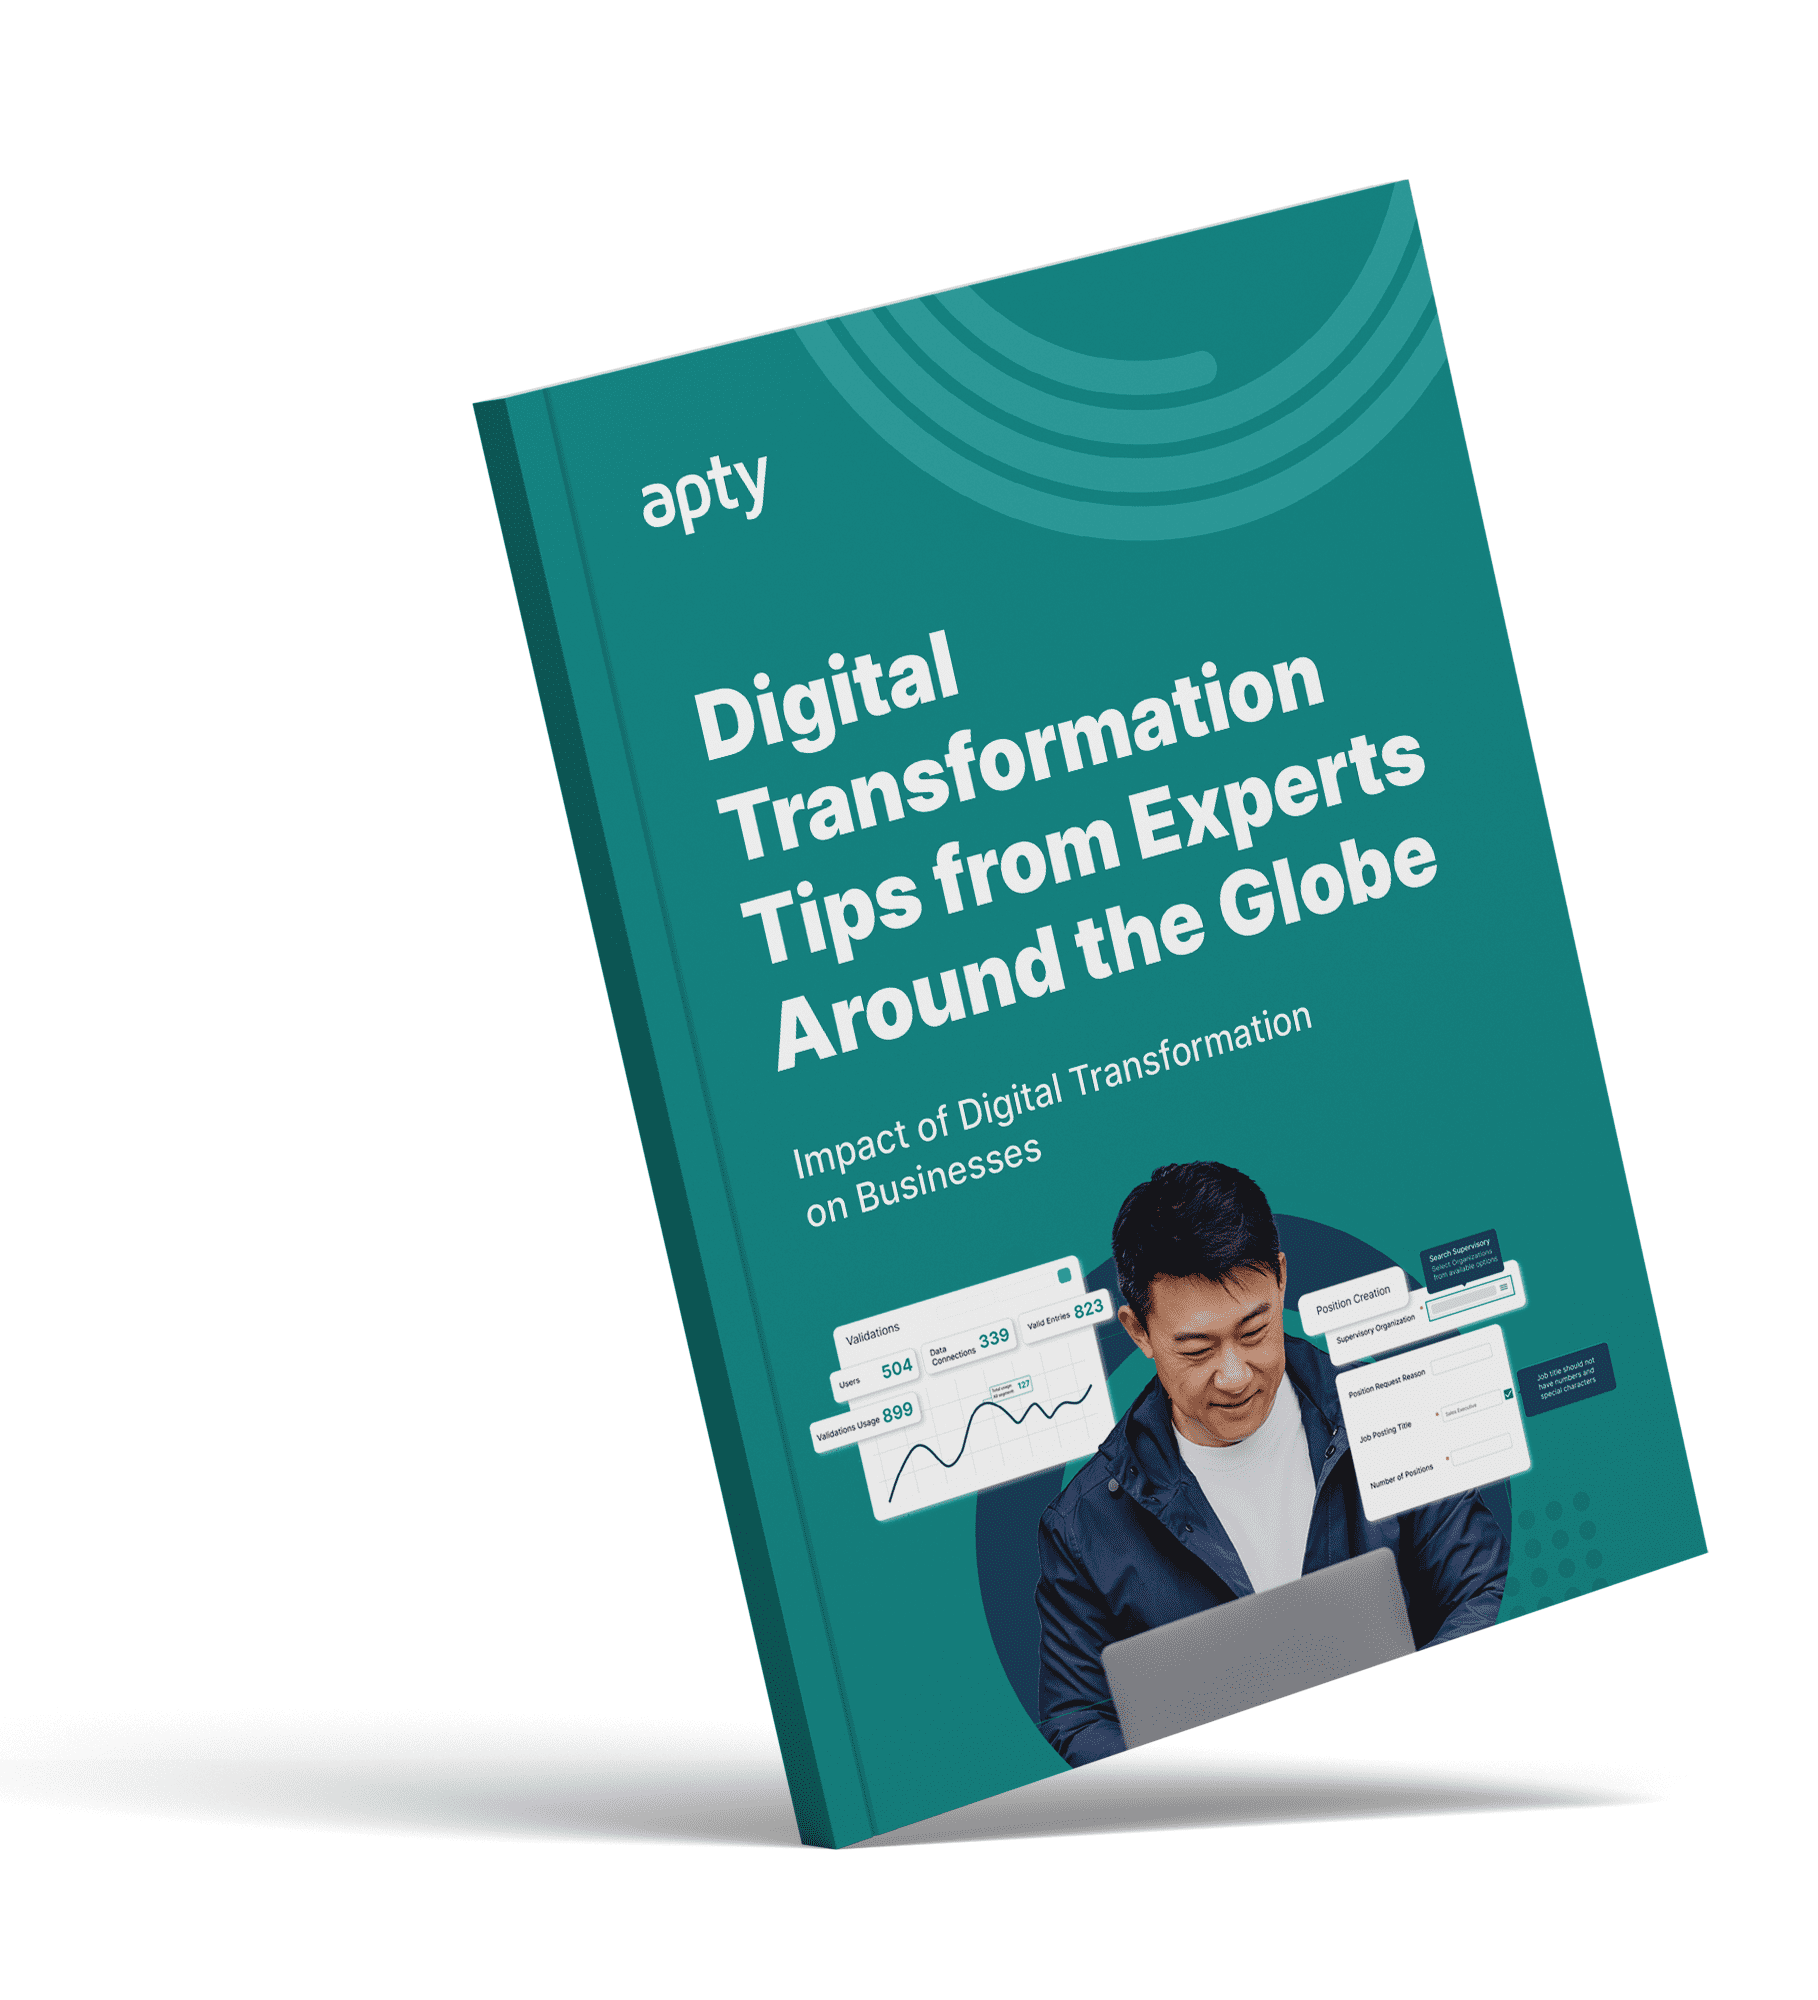 Digital transformation Tips from Experts